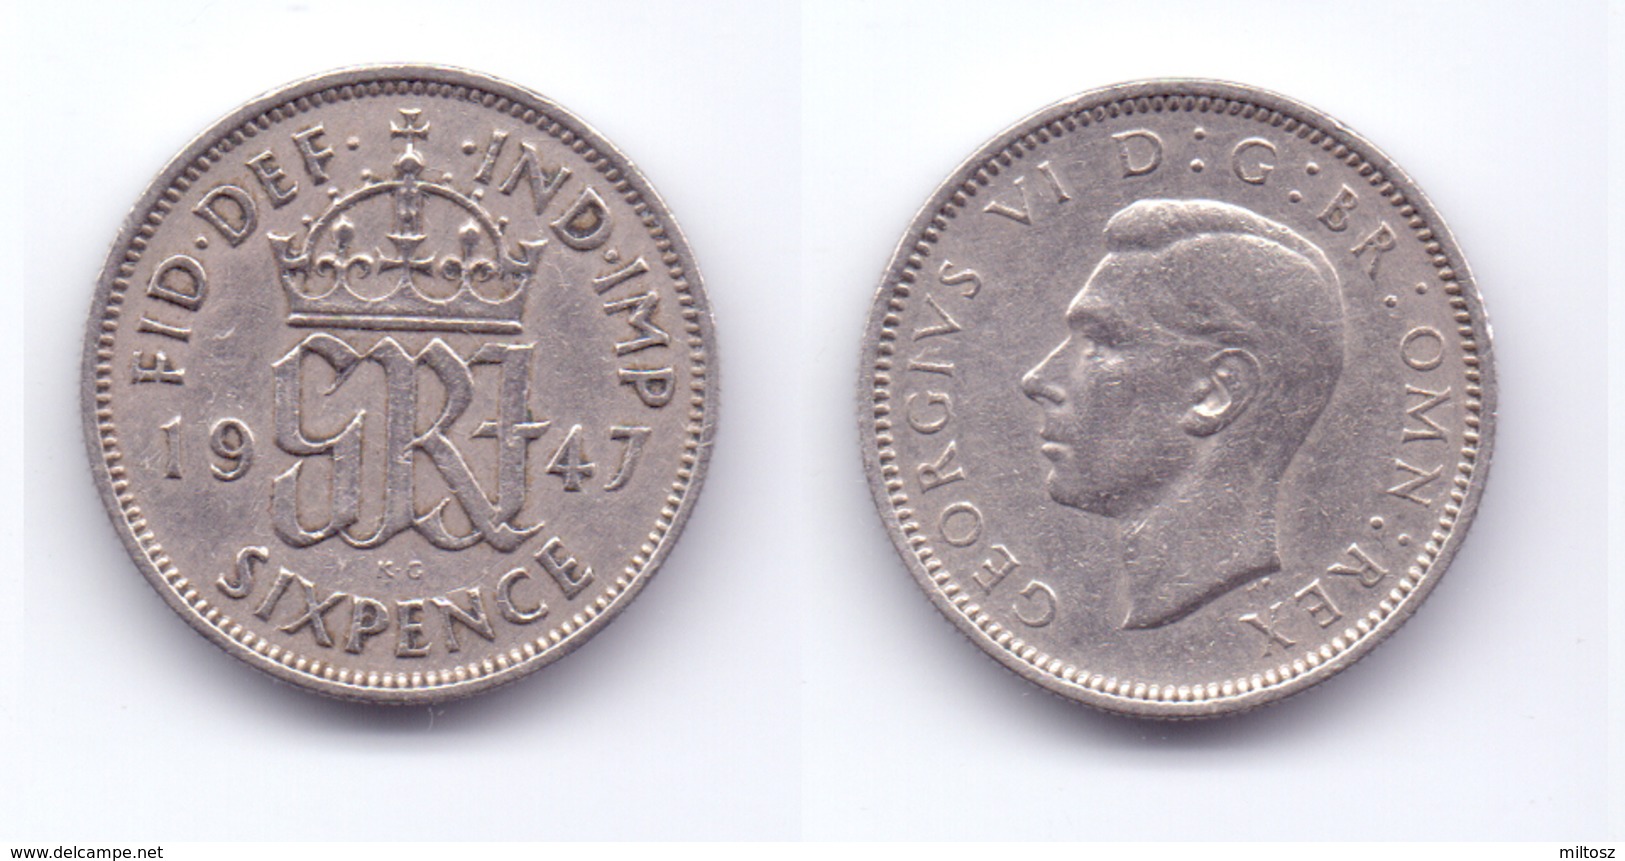 Great Britain 6 Pence 1947 - H. 6 Pence